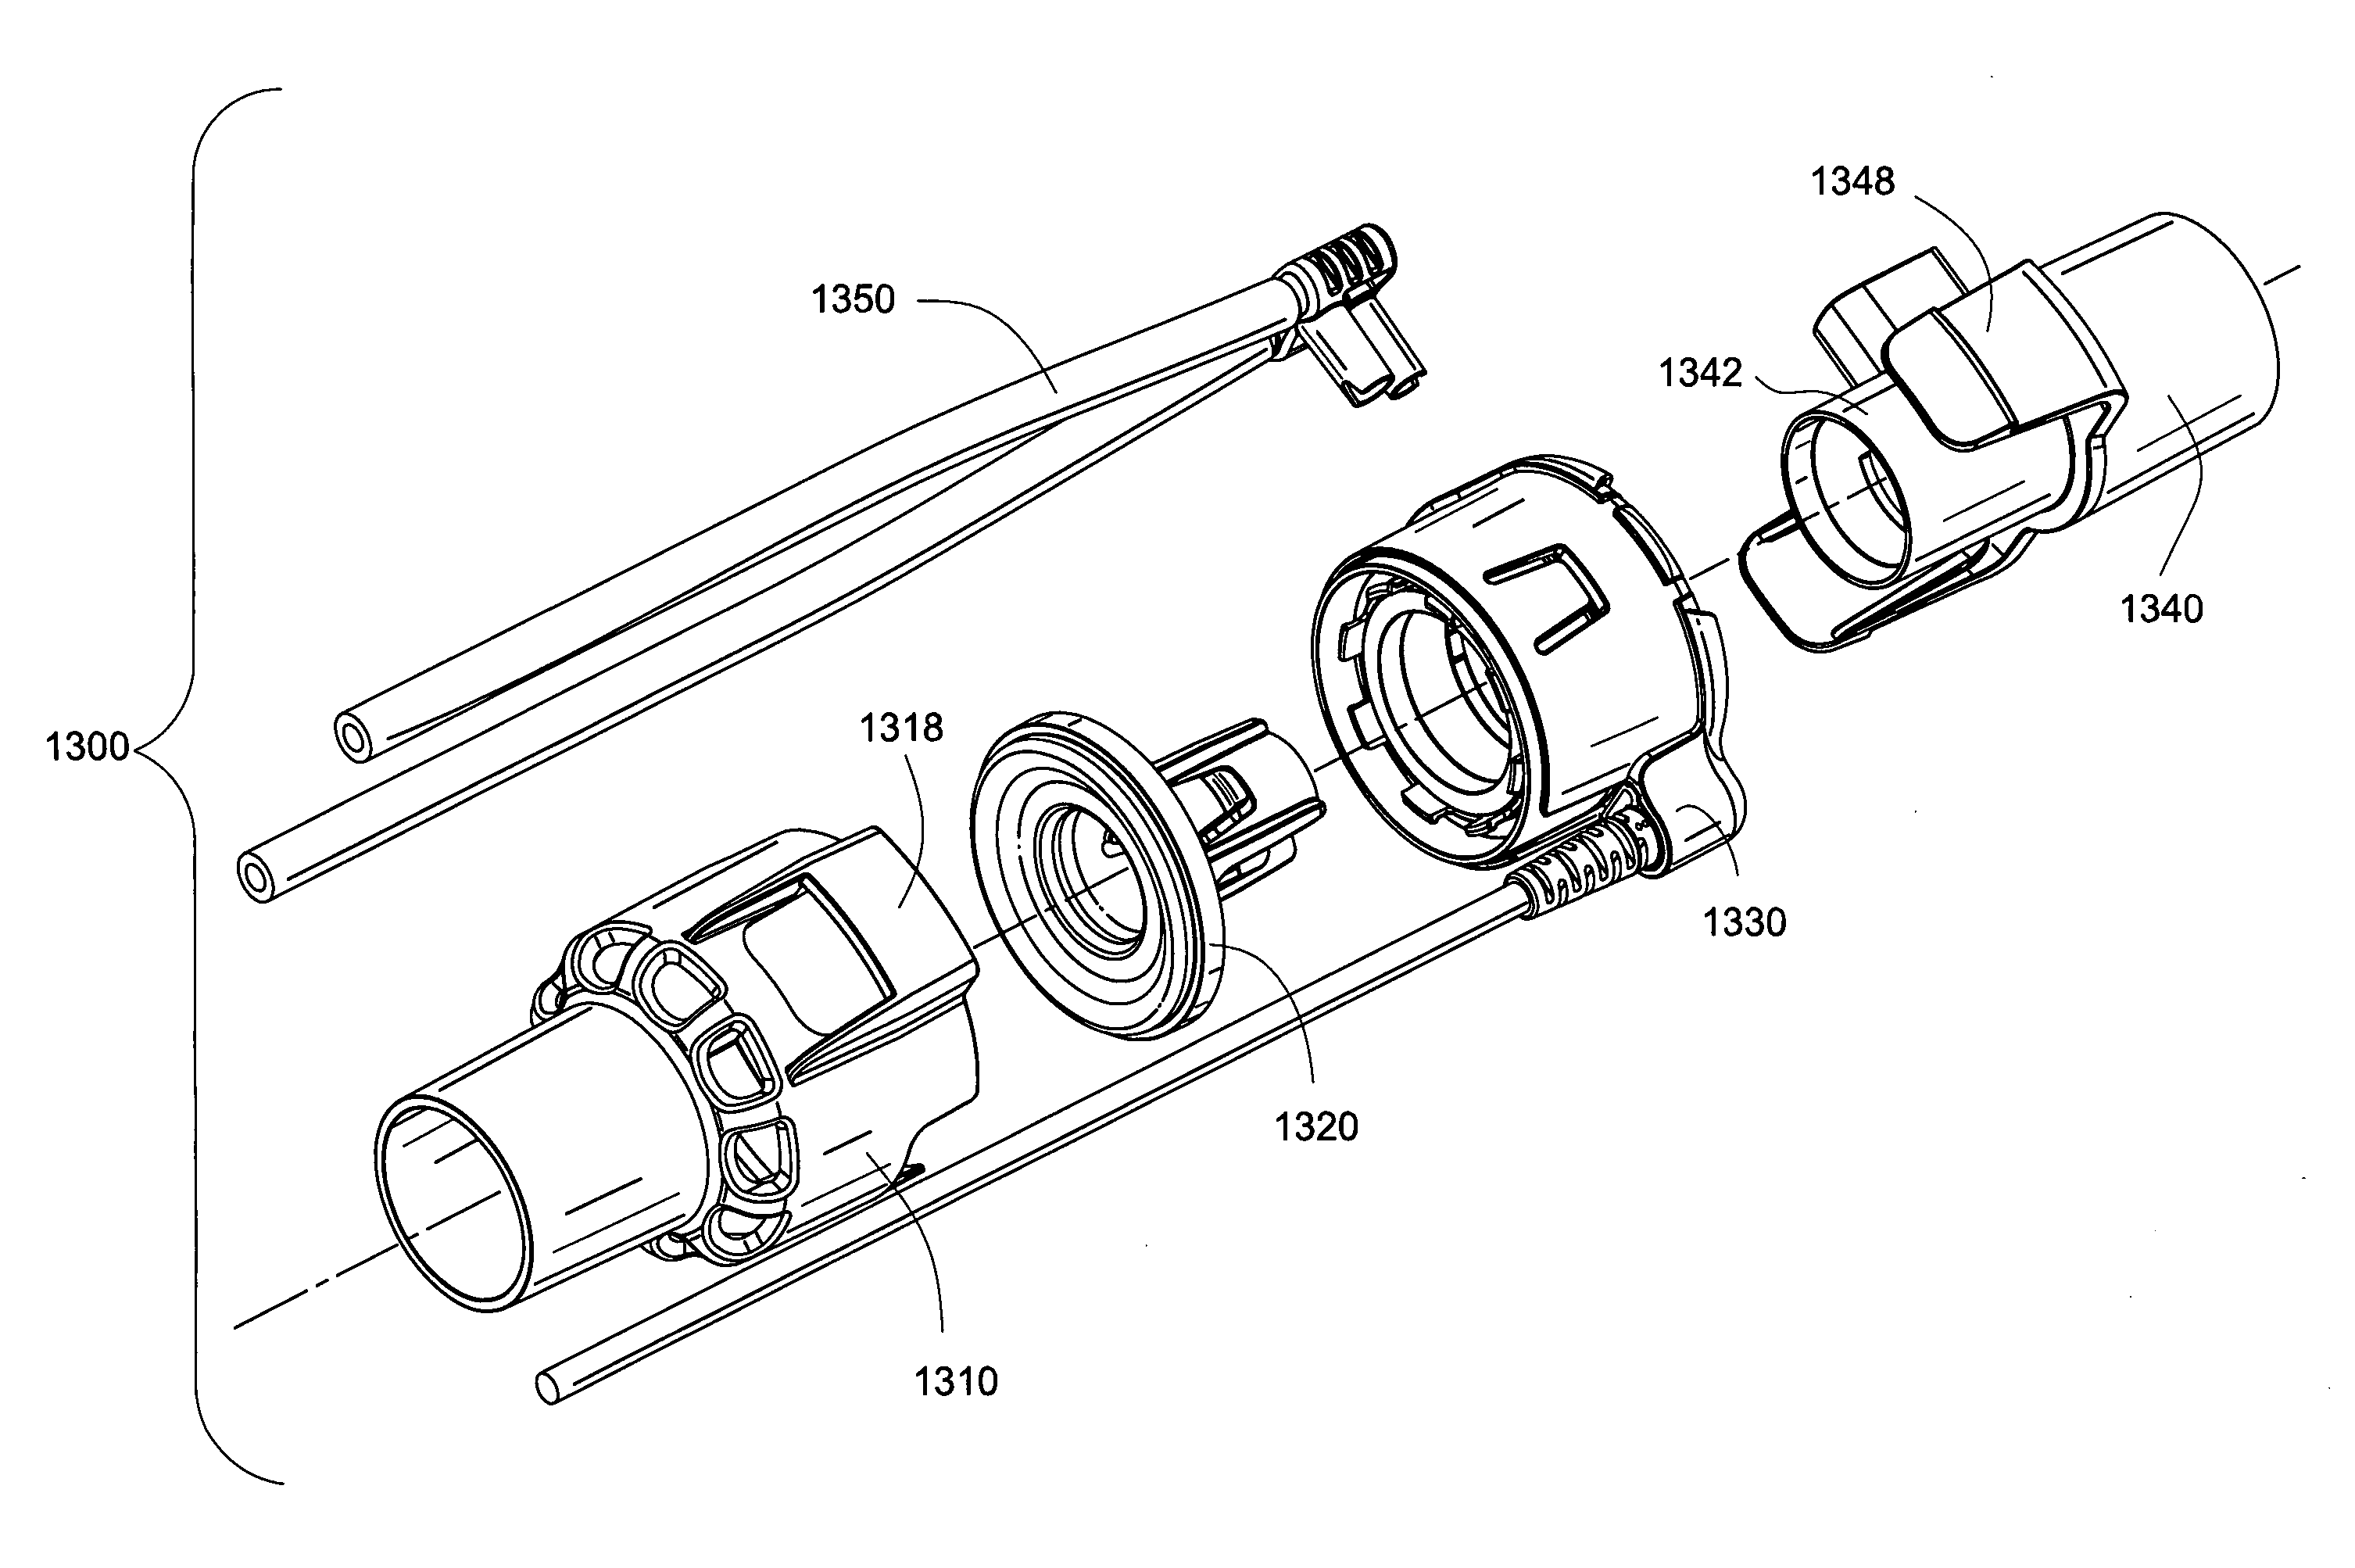 Breathing assistance device with linear actuated gas regulating valve